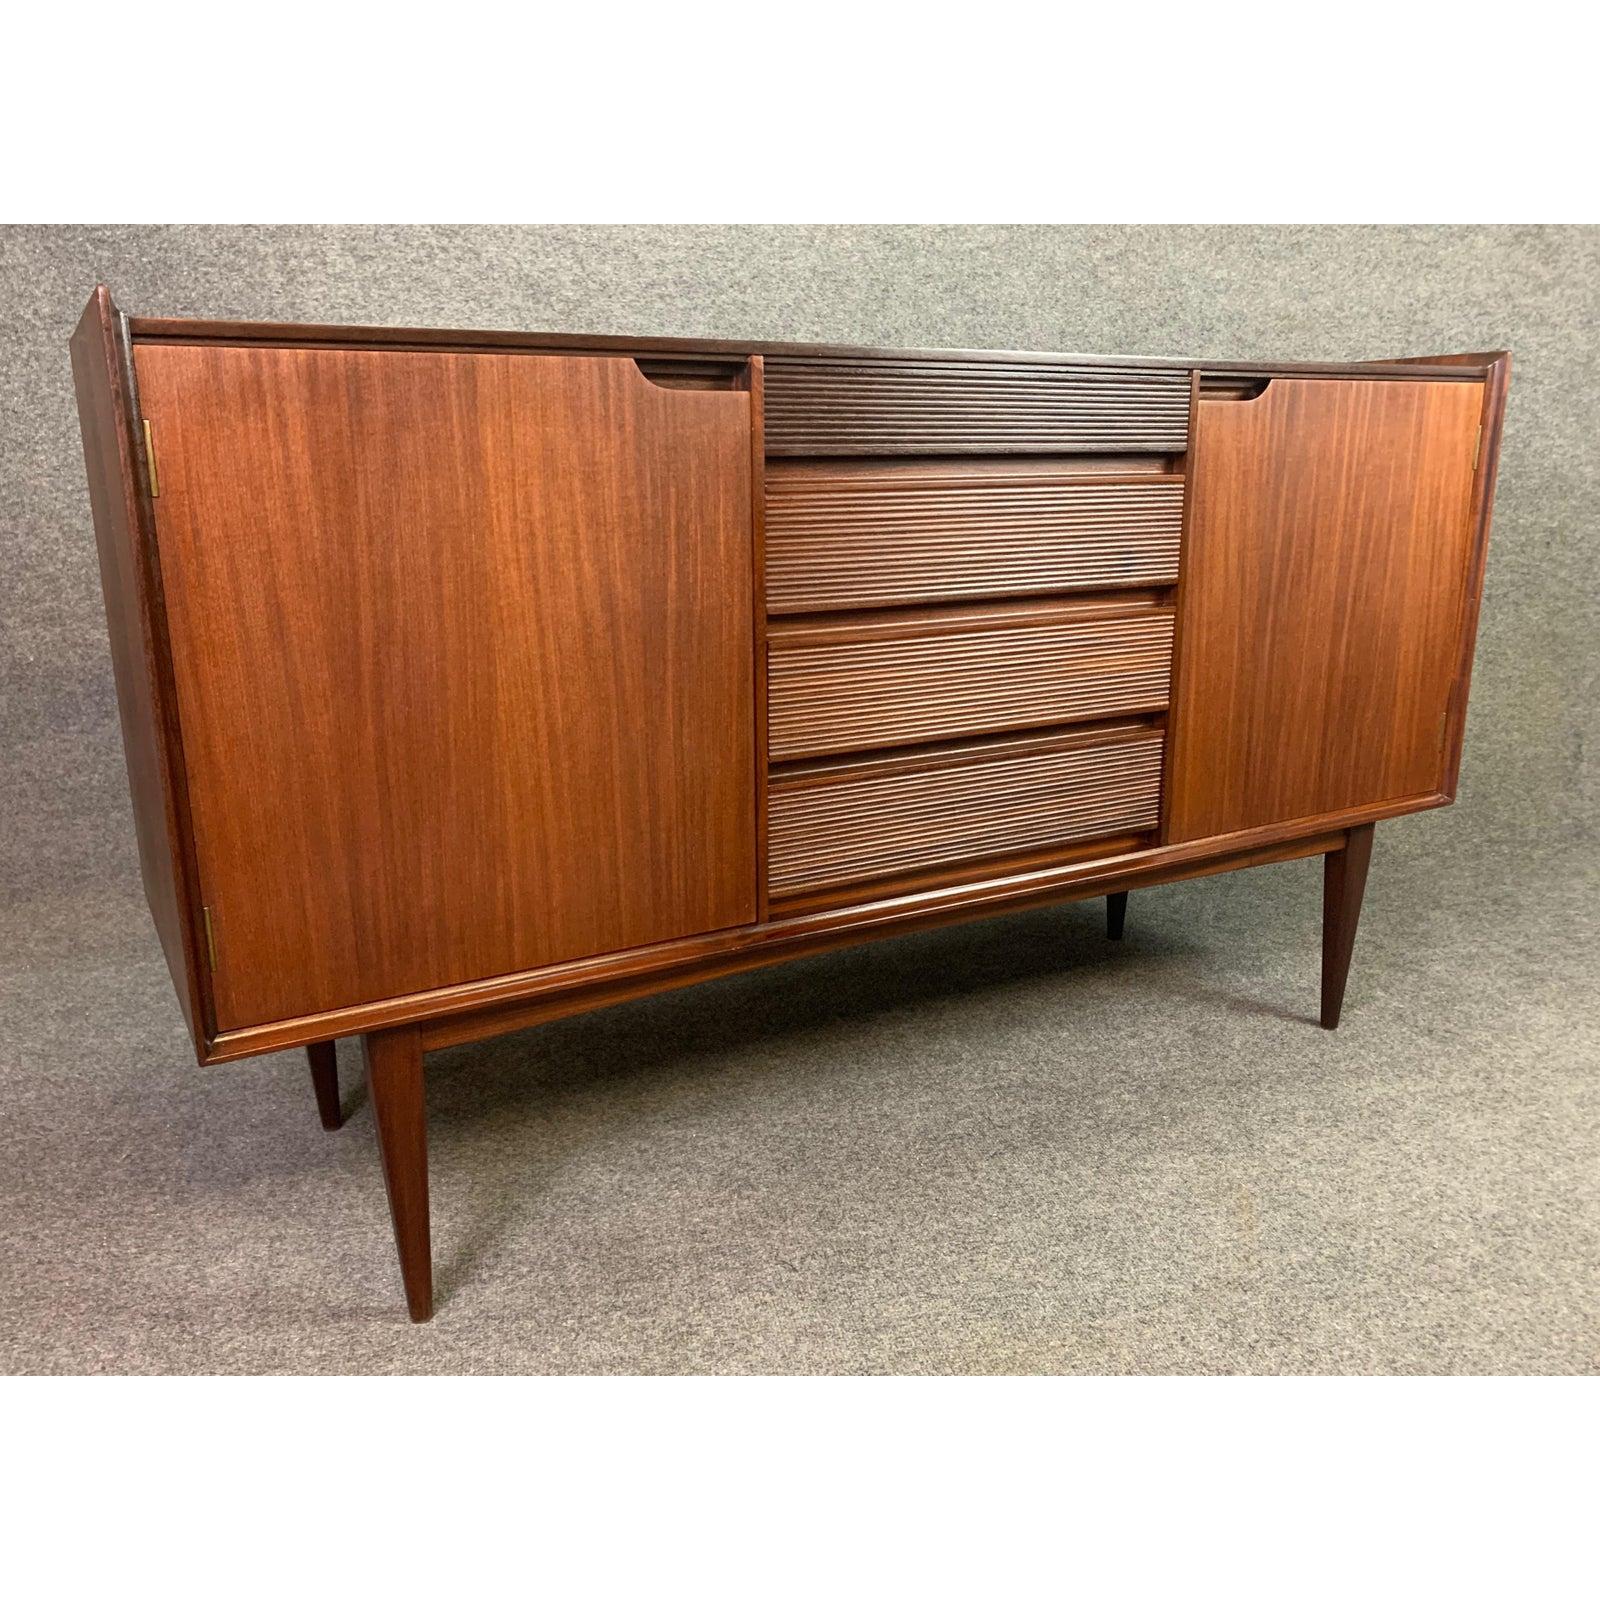 Here is a beautiful Mid-Century Modern sideboard designed by Richard Hornby, manufactured by Fyne Ladye Furniture in England in the 1960s and sold at Heals of London.
This special piece, recently imported from UK to California before its